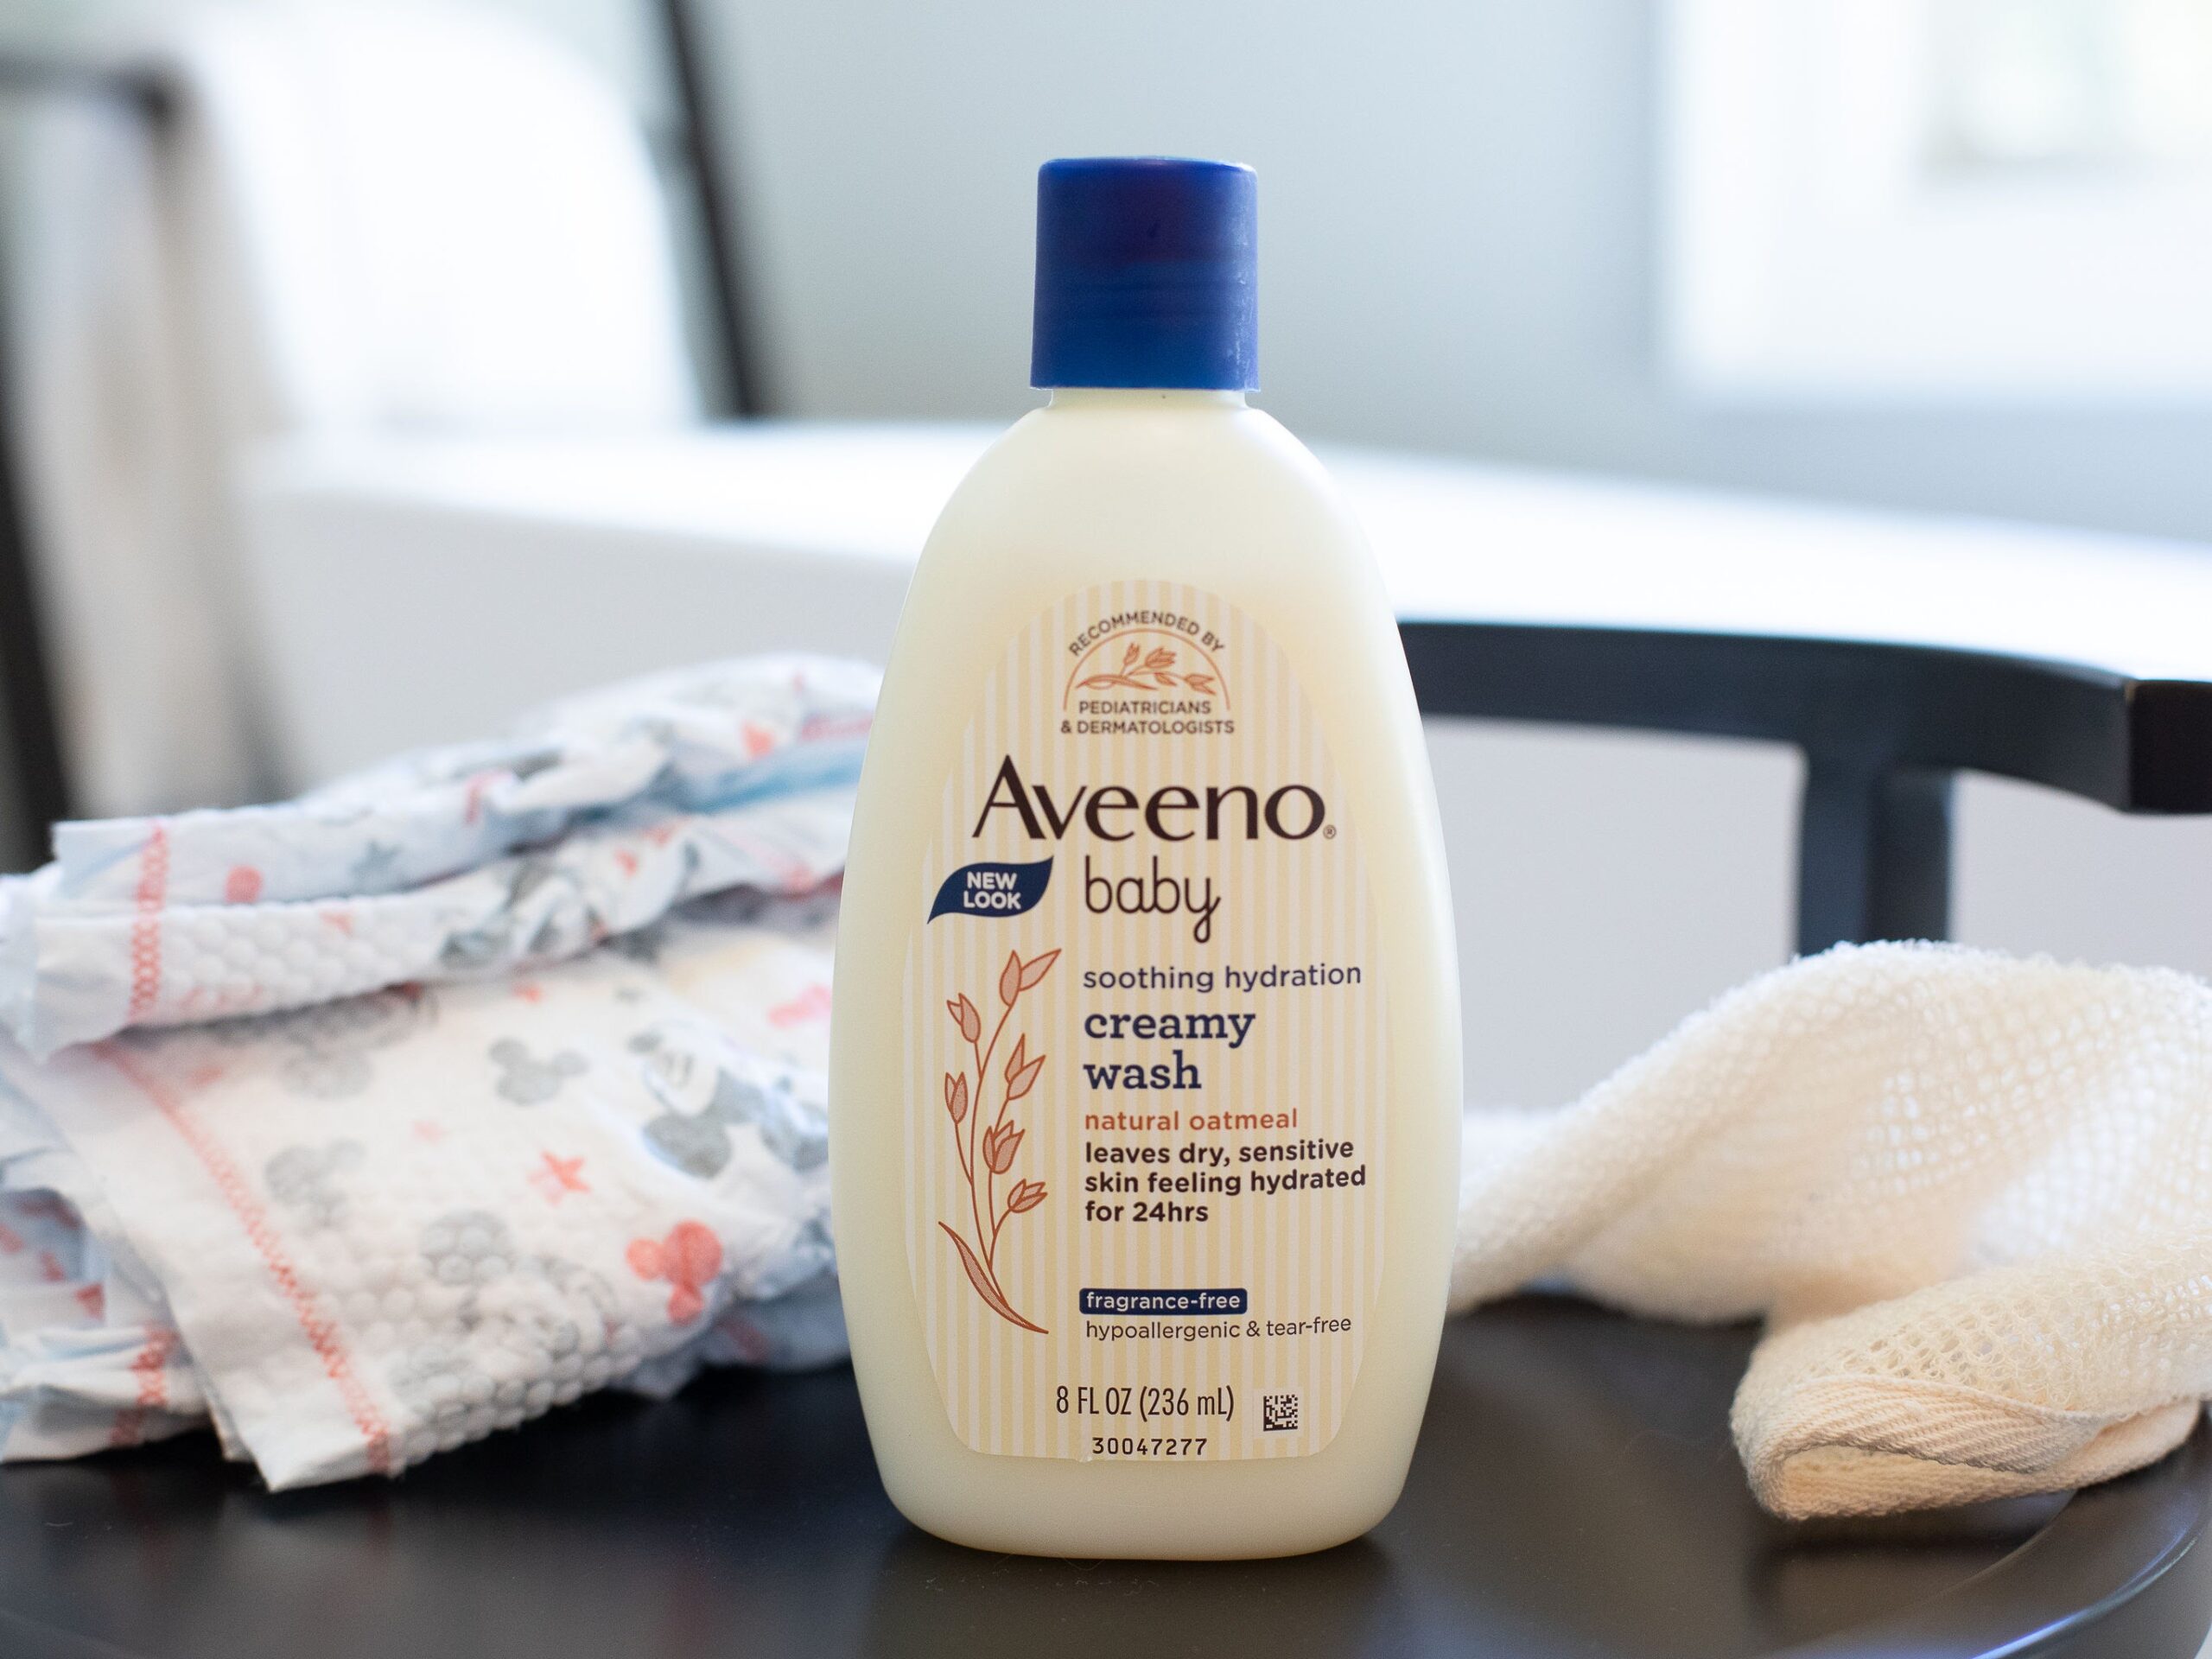 Aveeno Baby Products As Low As $4.99 At Kroger